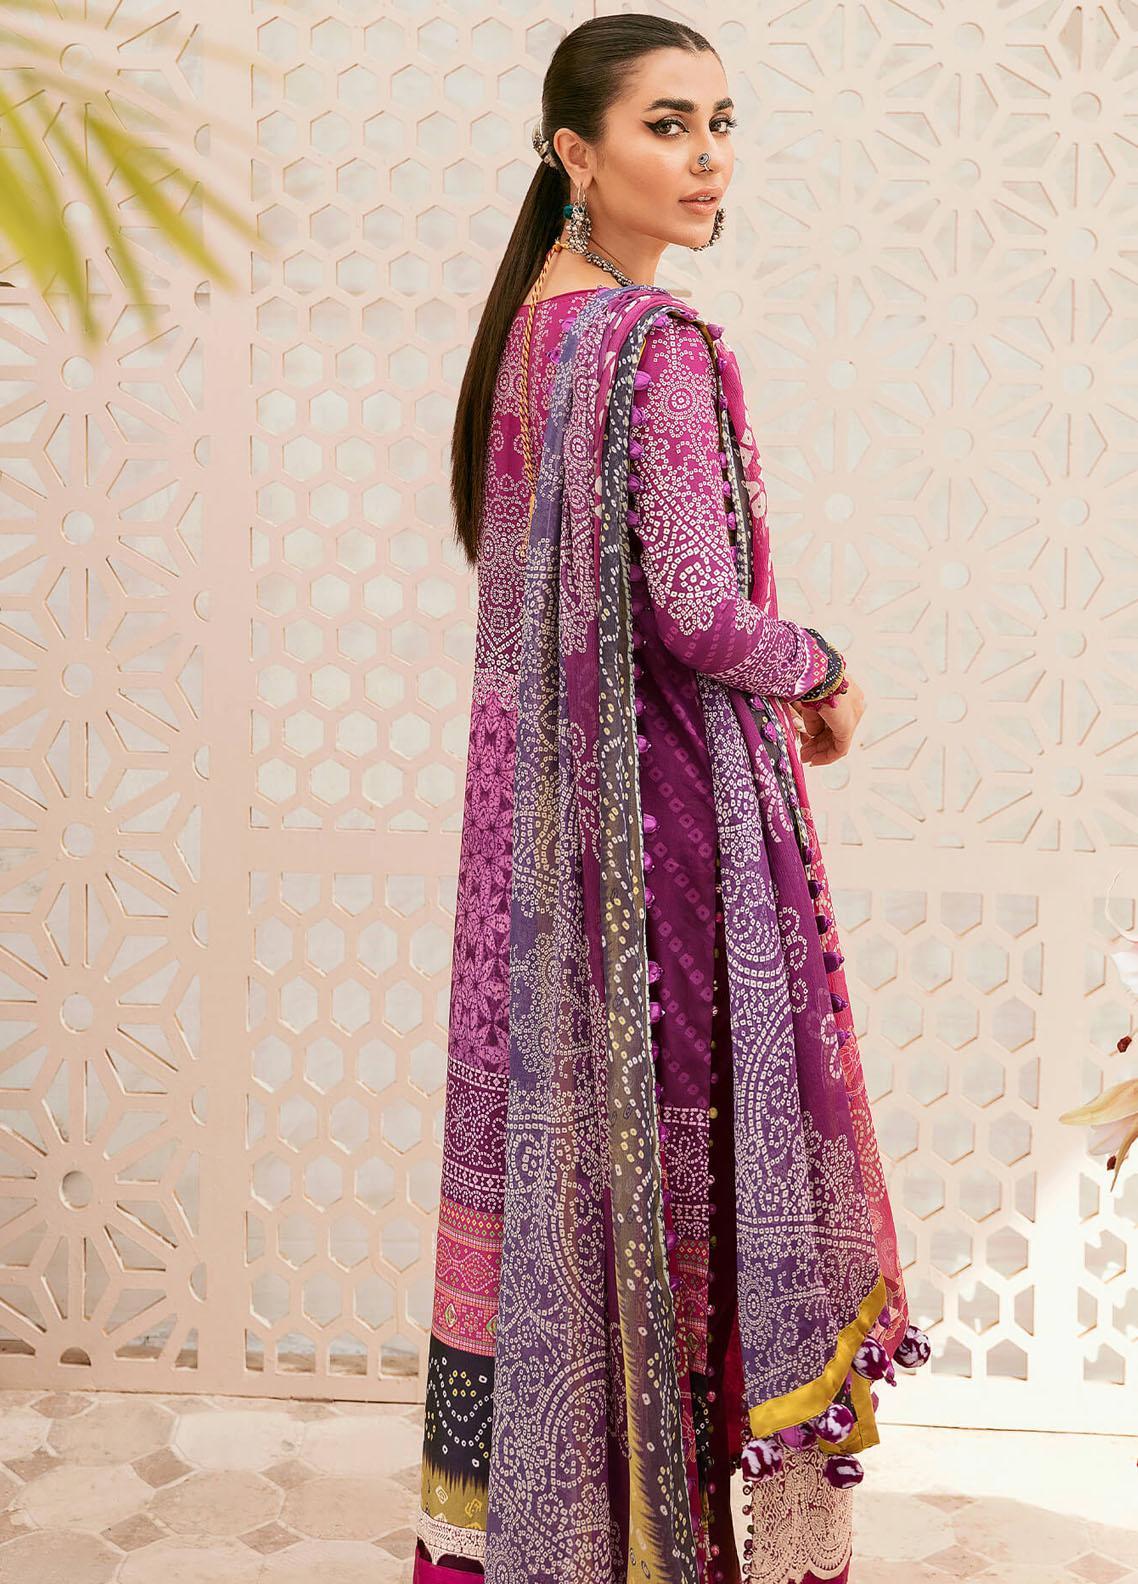 Asifa Nabeel- Qaus-e-Quzah Embroidered Lawn Suits Unstitched 3 Piece AN22QQ SS 09 Kashish Spring/Summer Collection